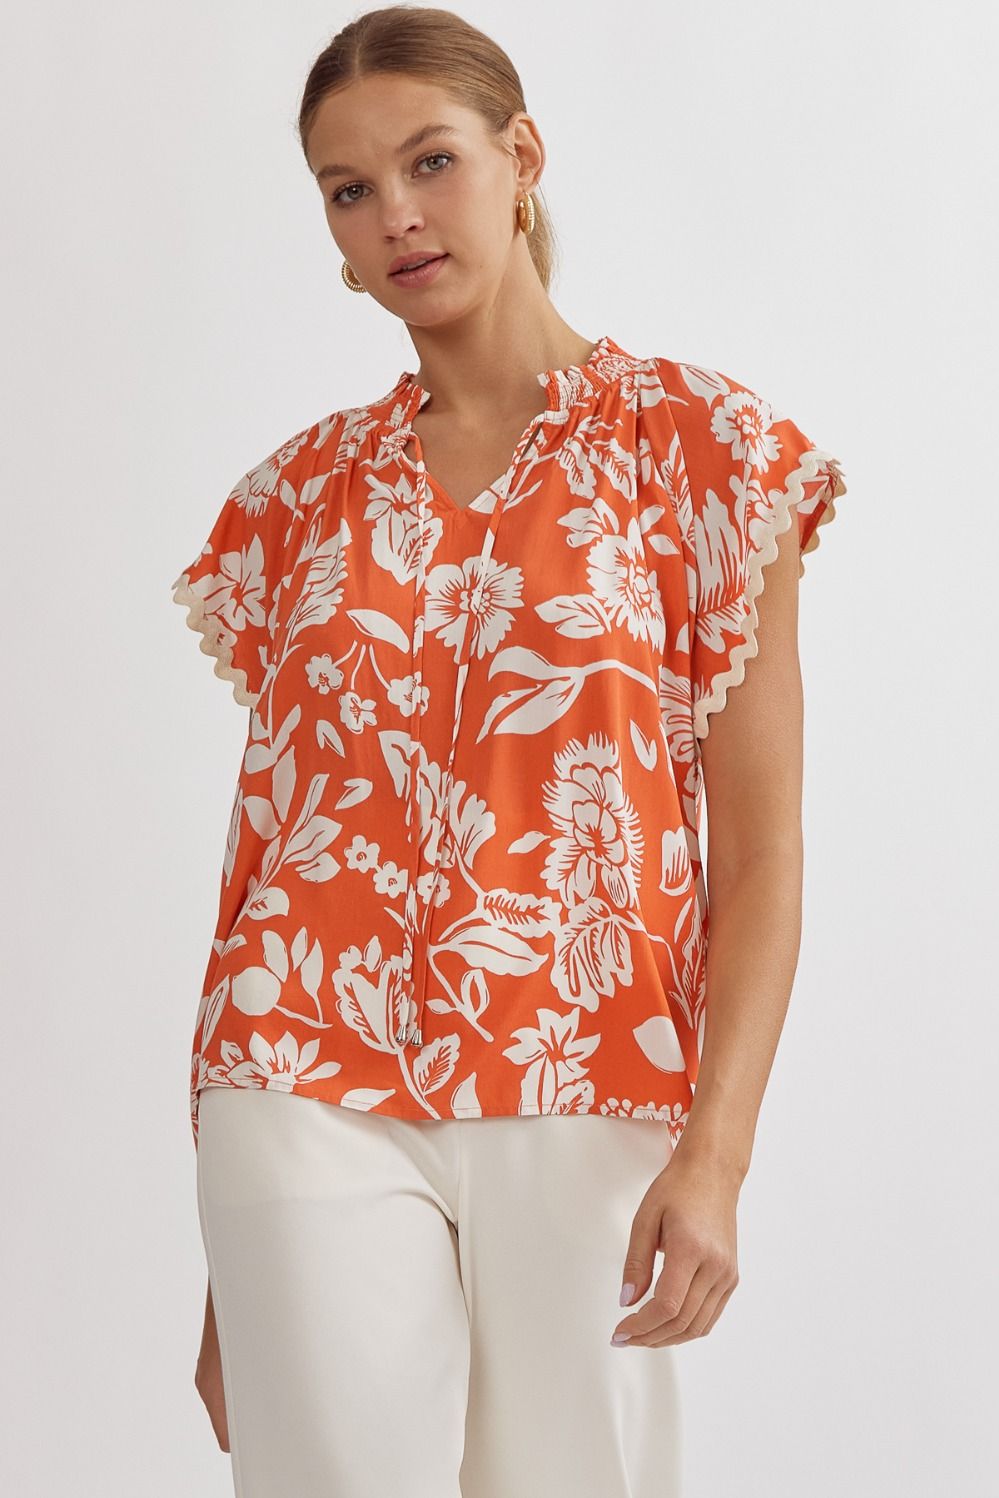 orange and white floral sleeveless top